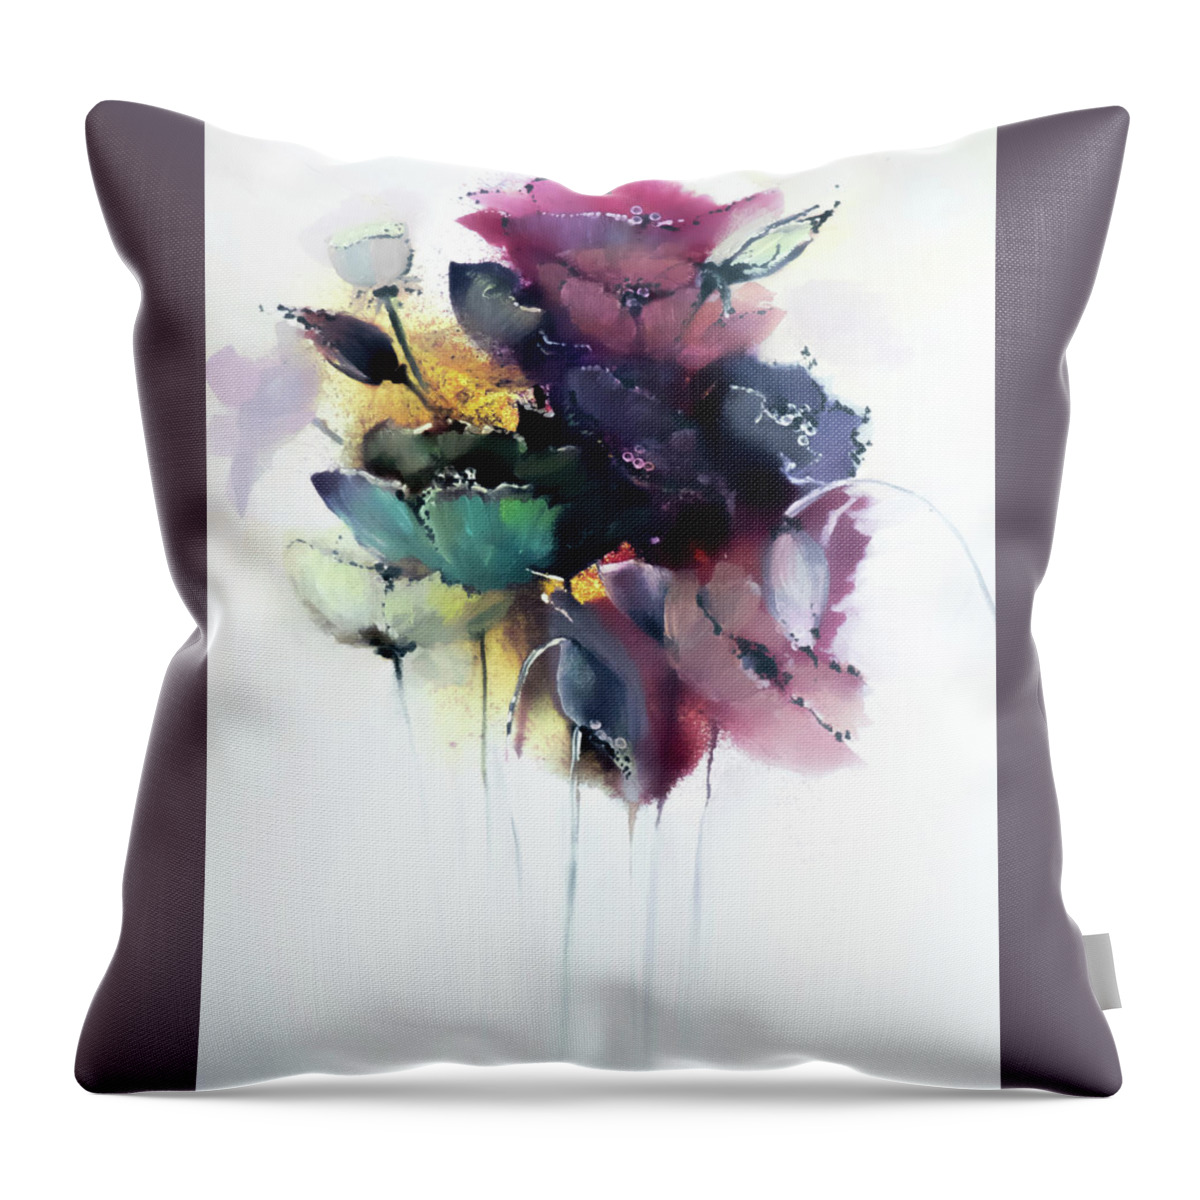 Floral Throw Pillow featuring the digital art A Bundle Of Belief Floral by Lisa Kaiser